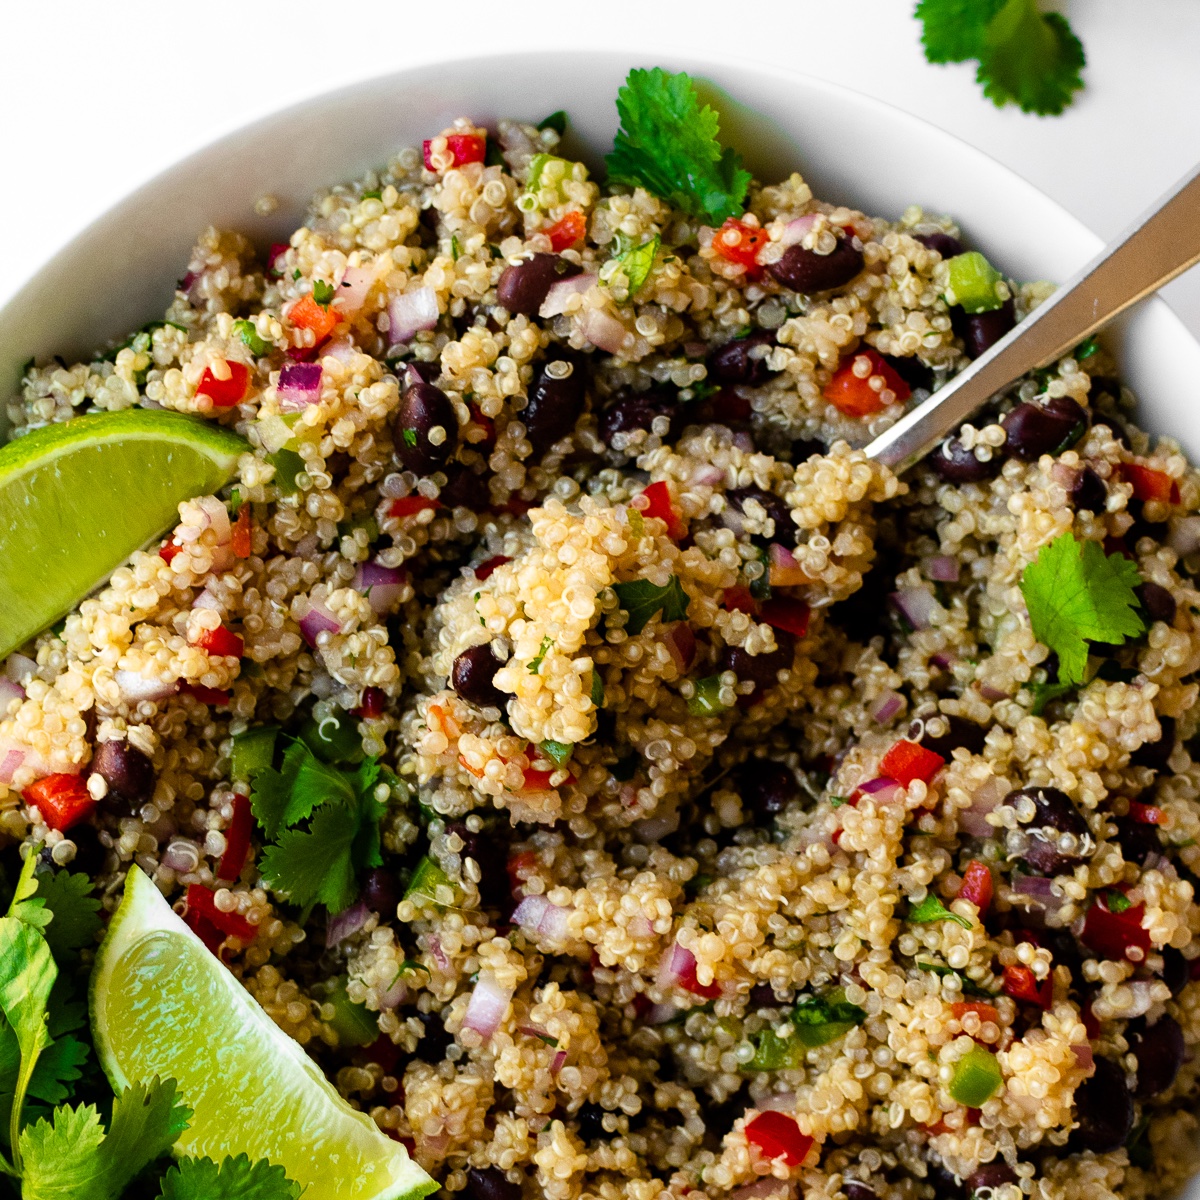 This vibrant and fresh Mexican quinoa salad – essentially a party in a bowl, if you will. Loaded with quinoa, bell peppers, red onions, black beans, and combined with a fresh cilantro lime dressing. This bold flavored dish will enhance any meal.